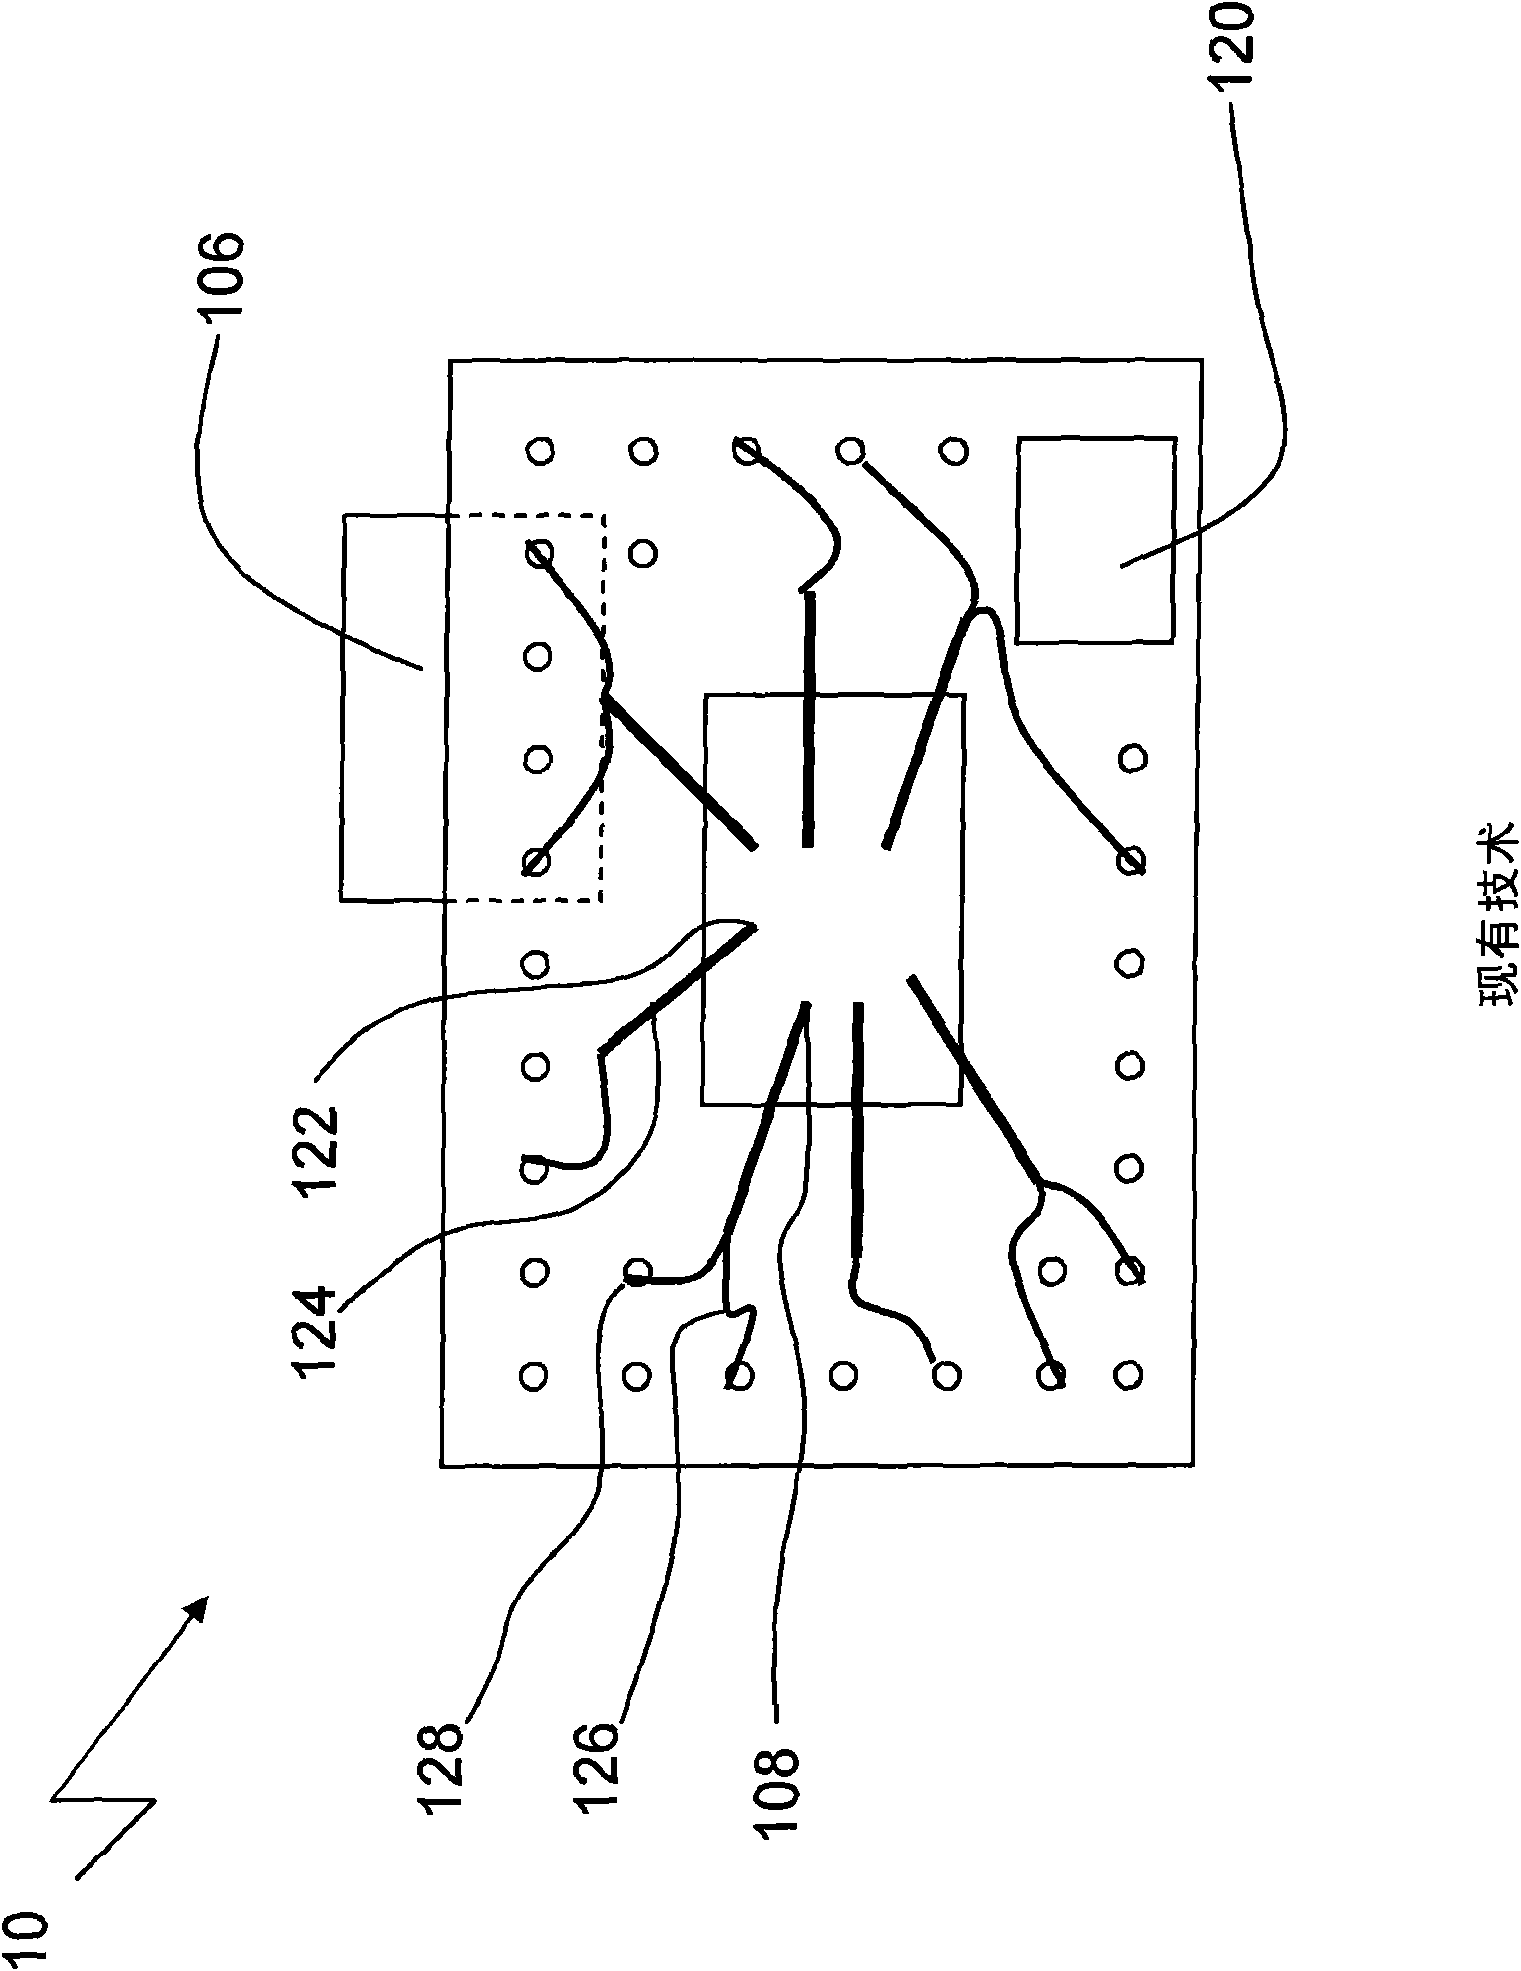 Testing of electronic circuits using an active probe integrated circuit